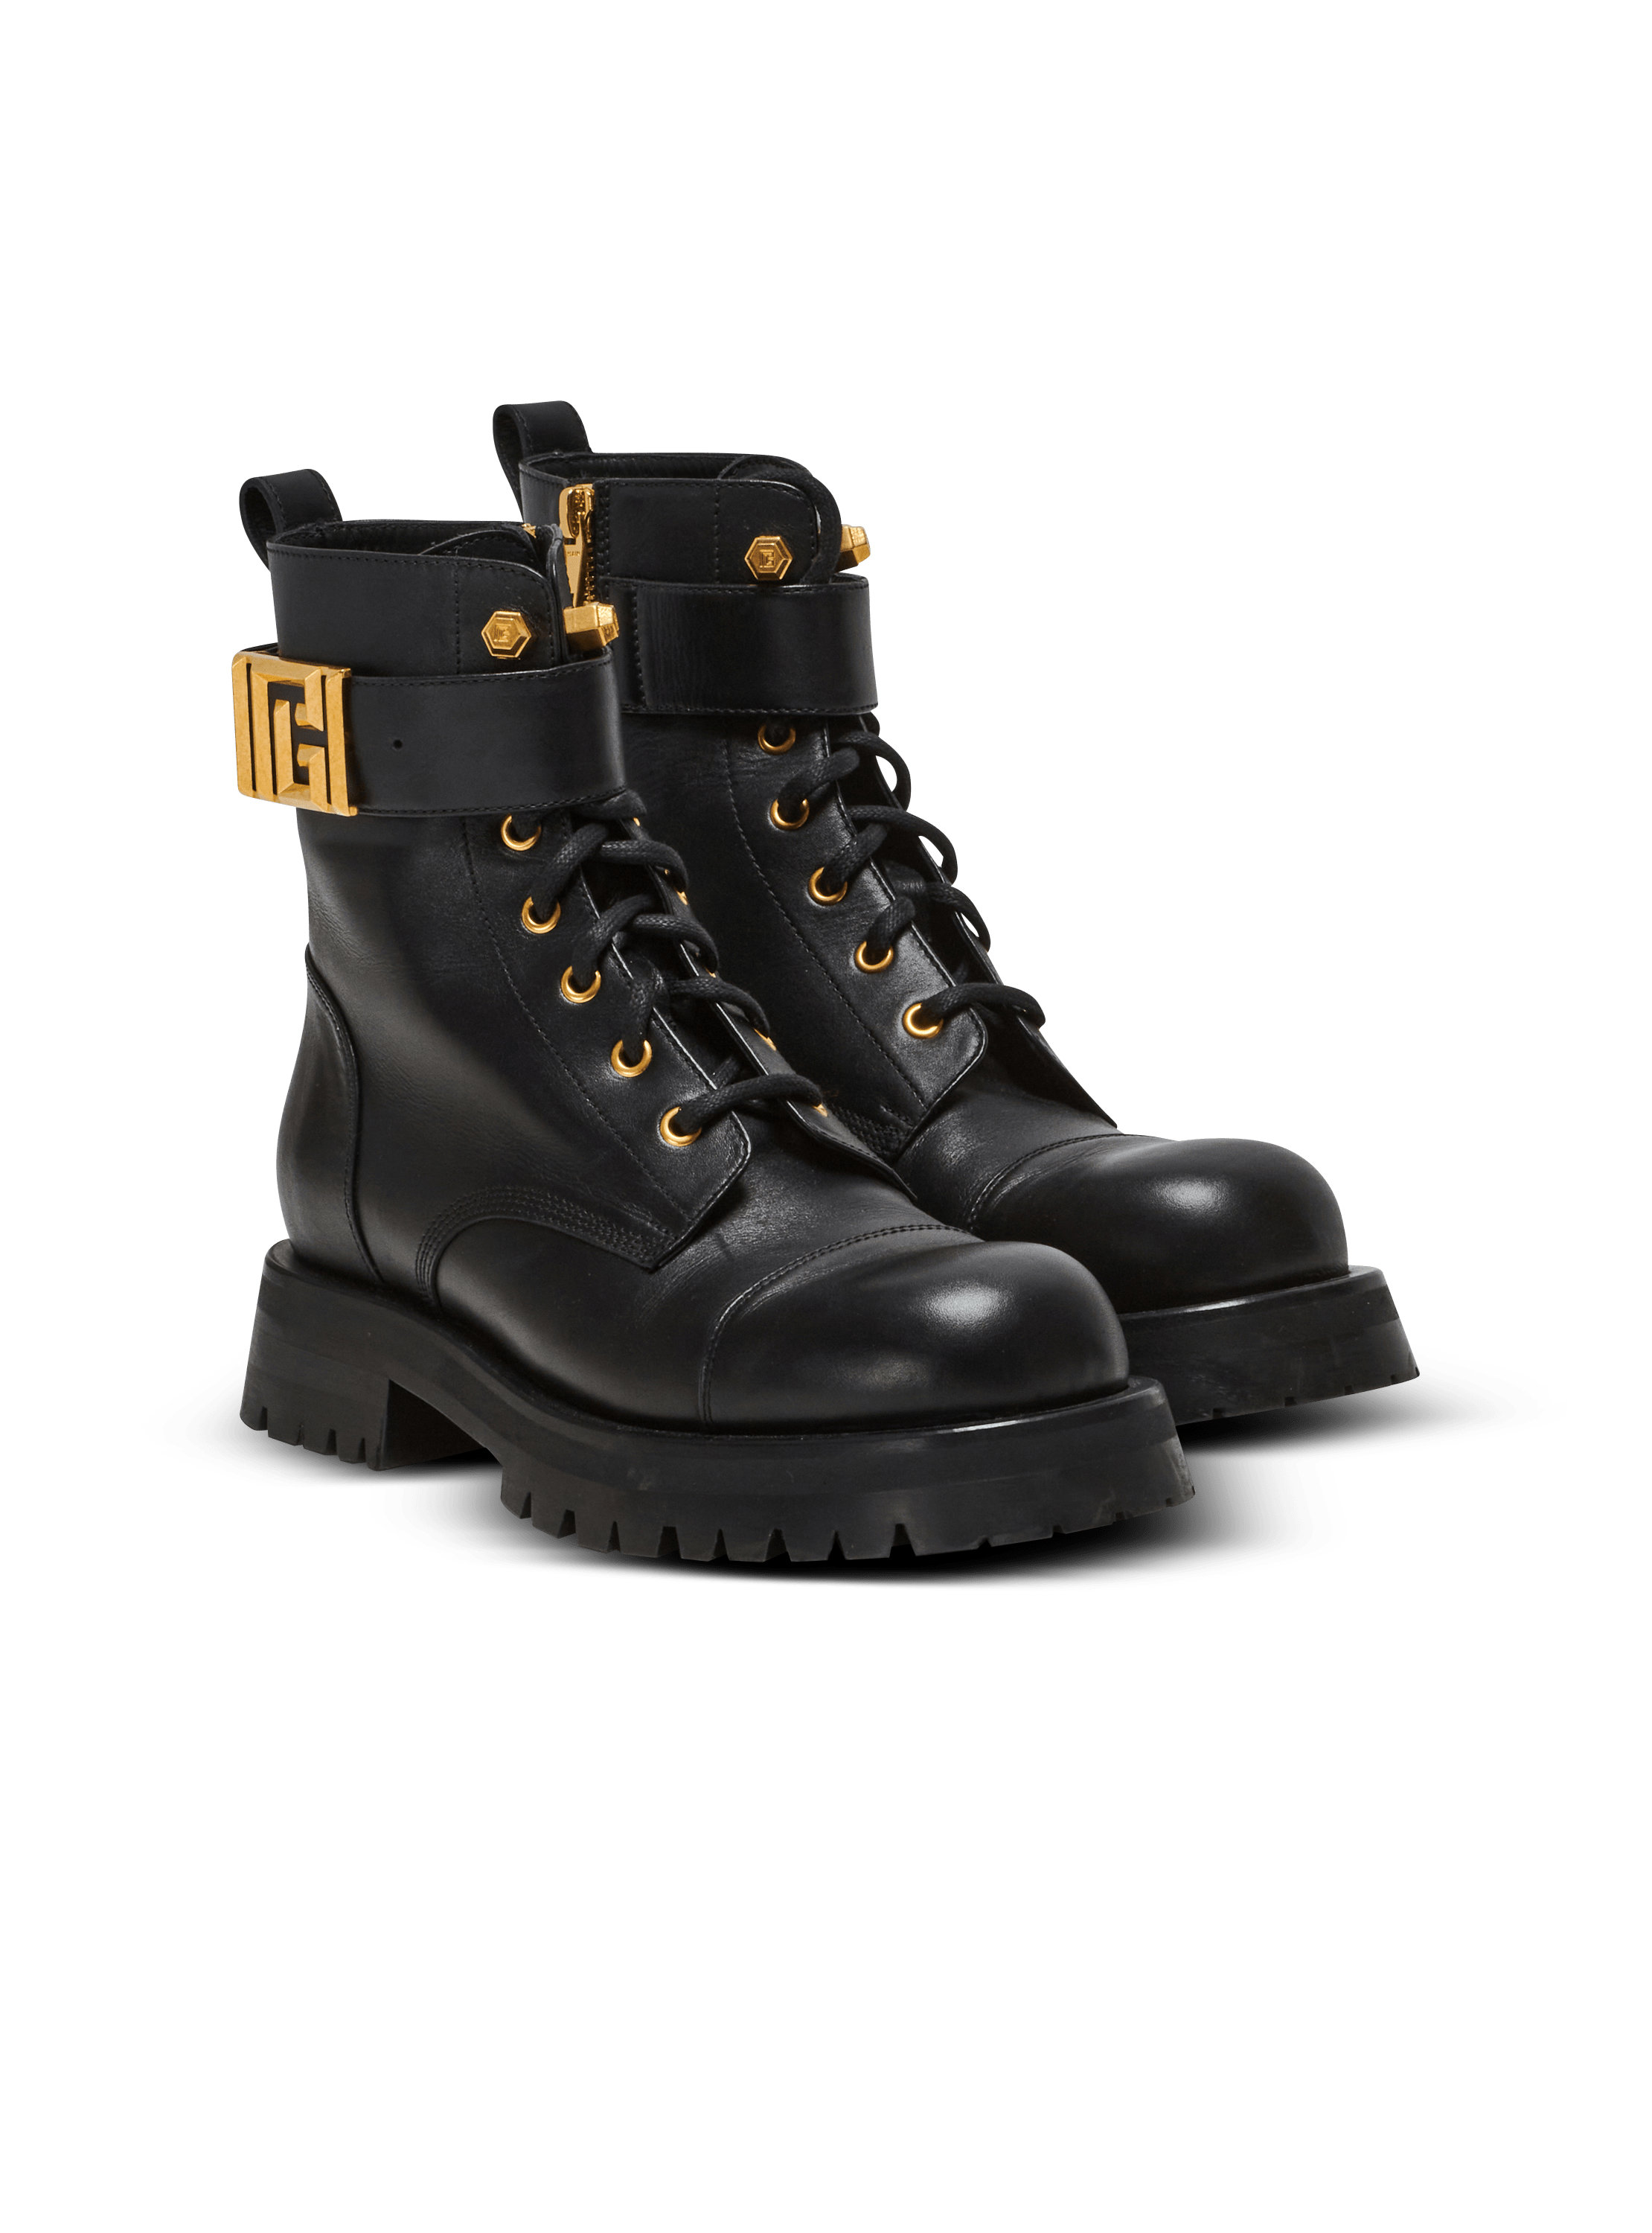 Charlie leather ranger boots 